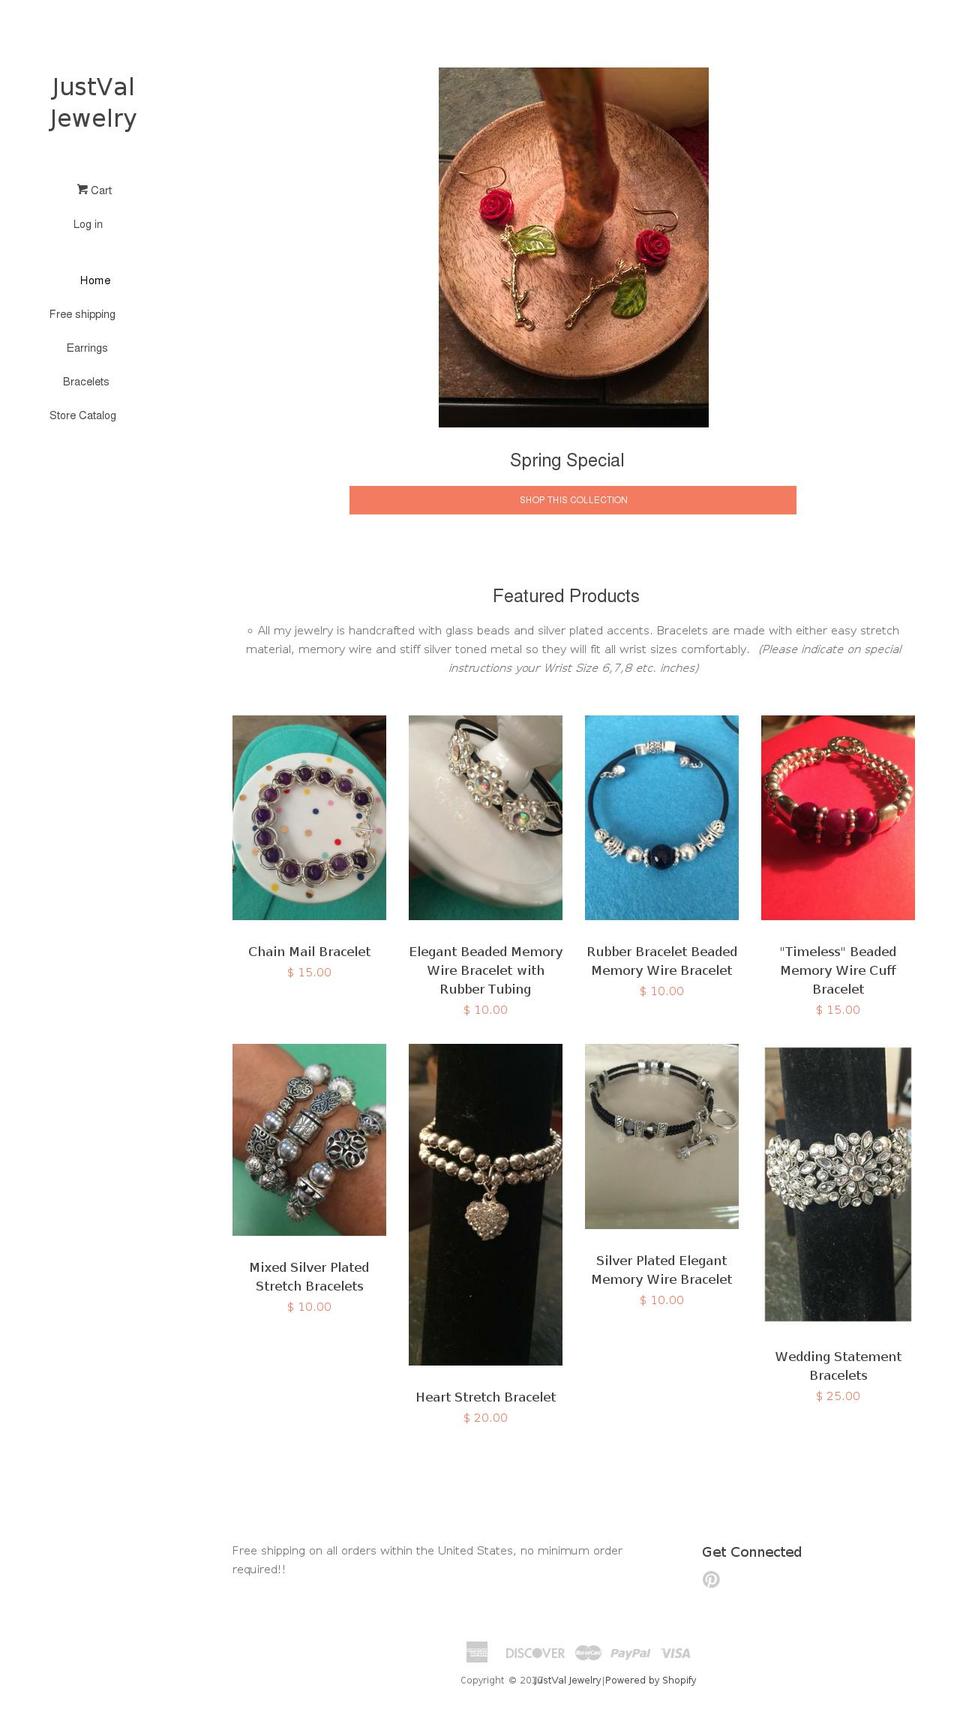 Copy of Pop Shopify theme site example justval-jewelry.com